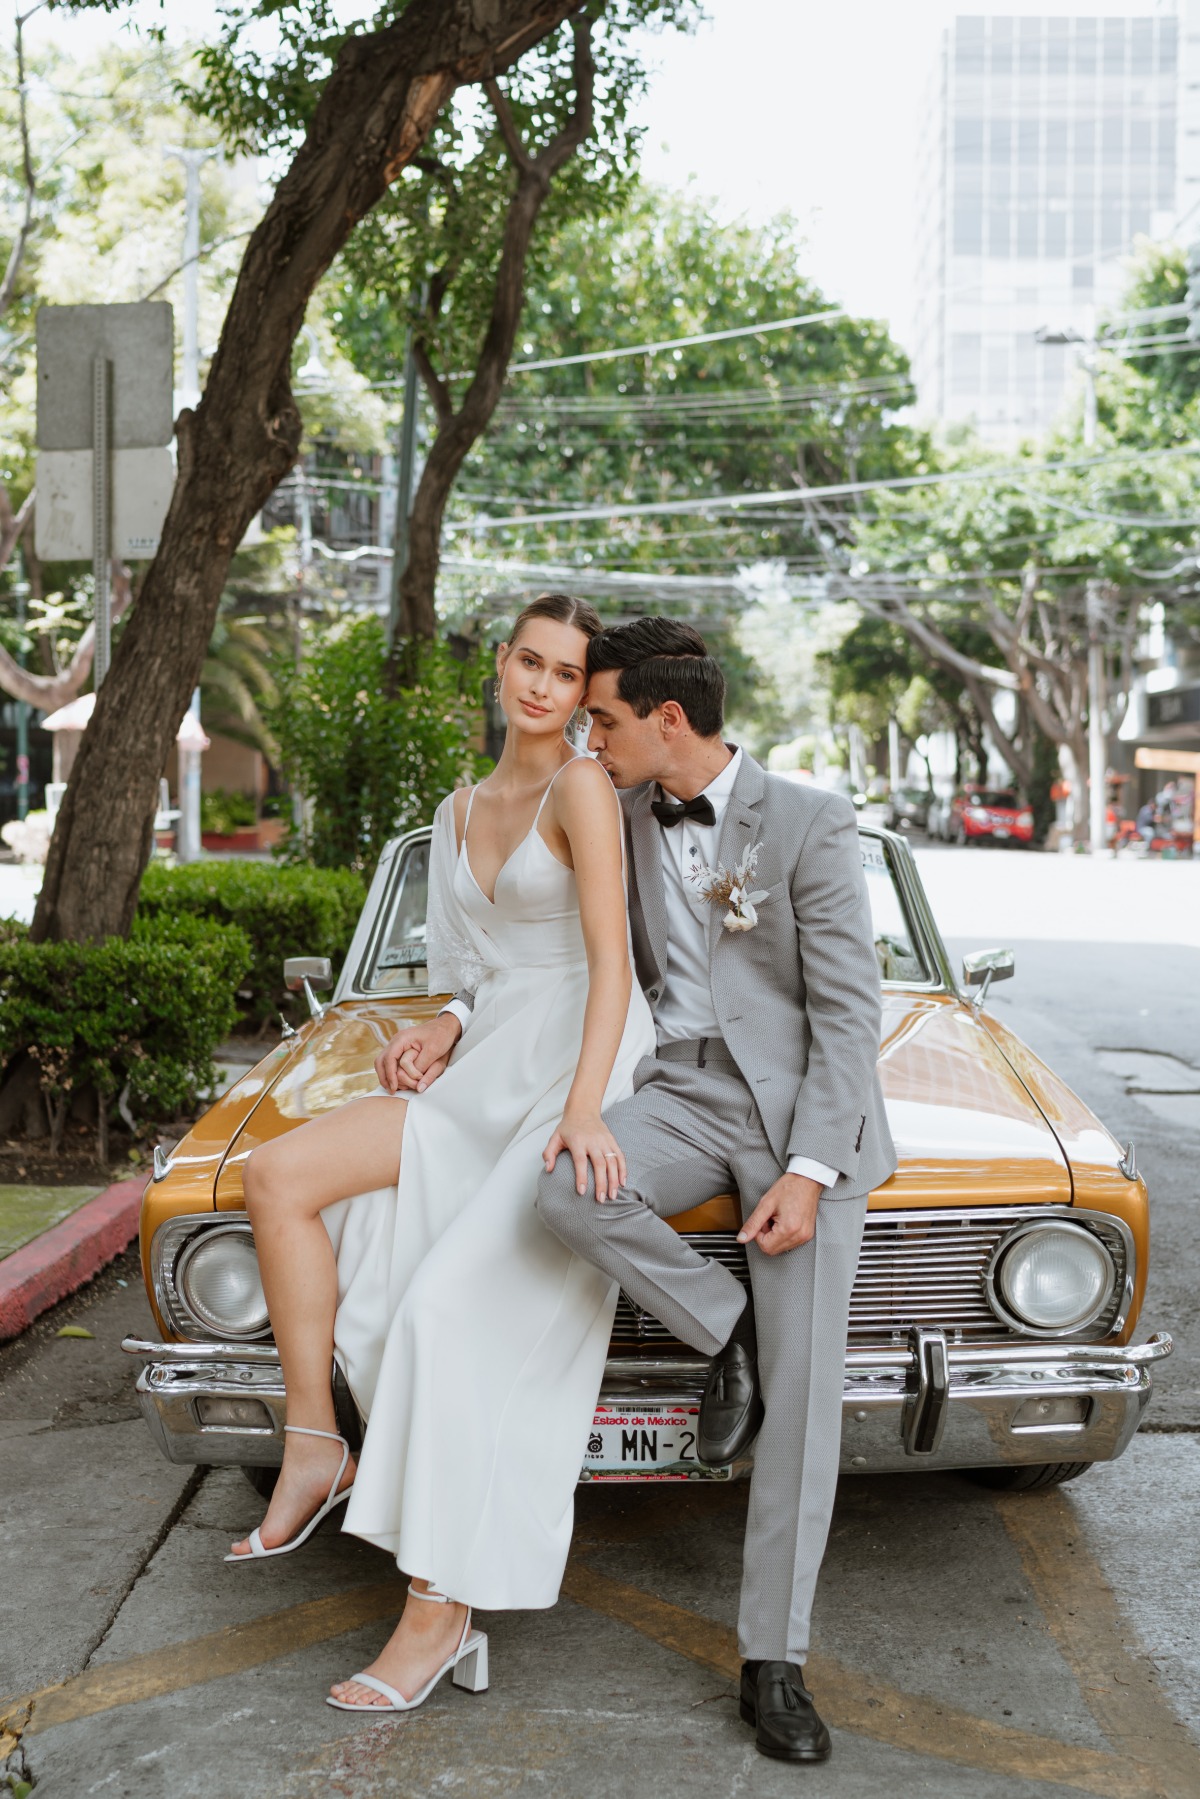 Married In Mexico City: A Destination Wedding With Class, Culture, And Style